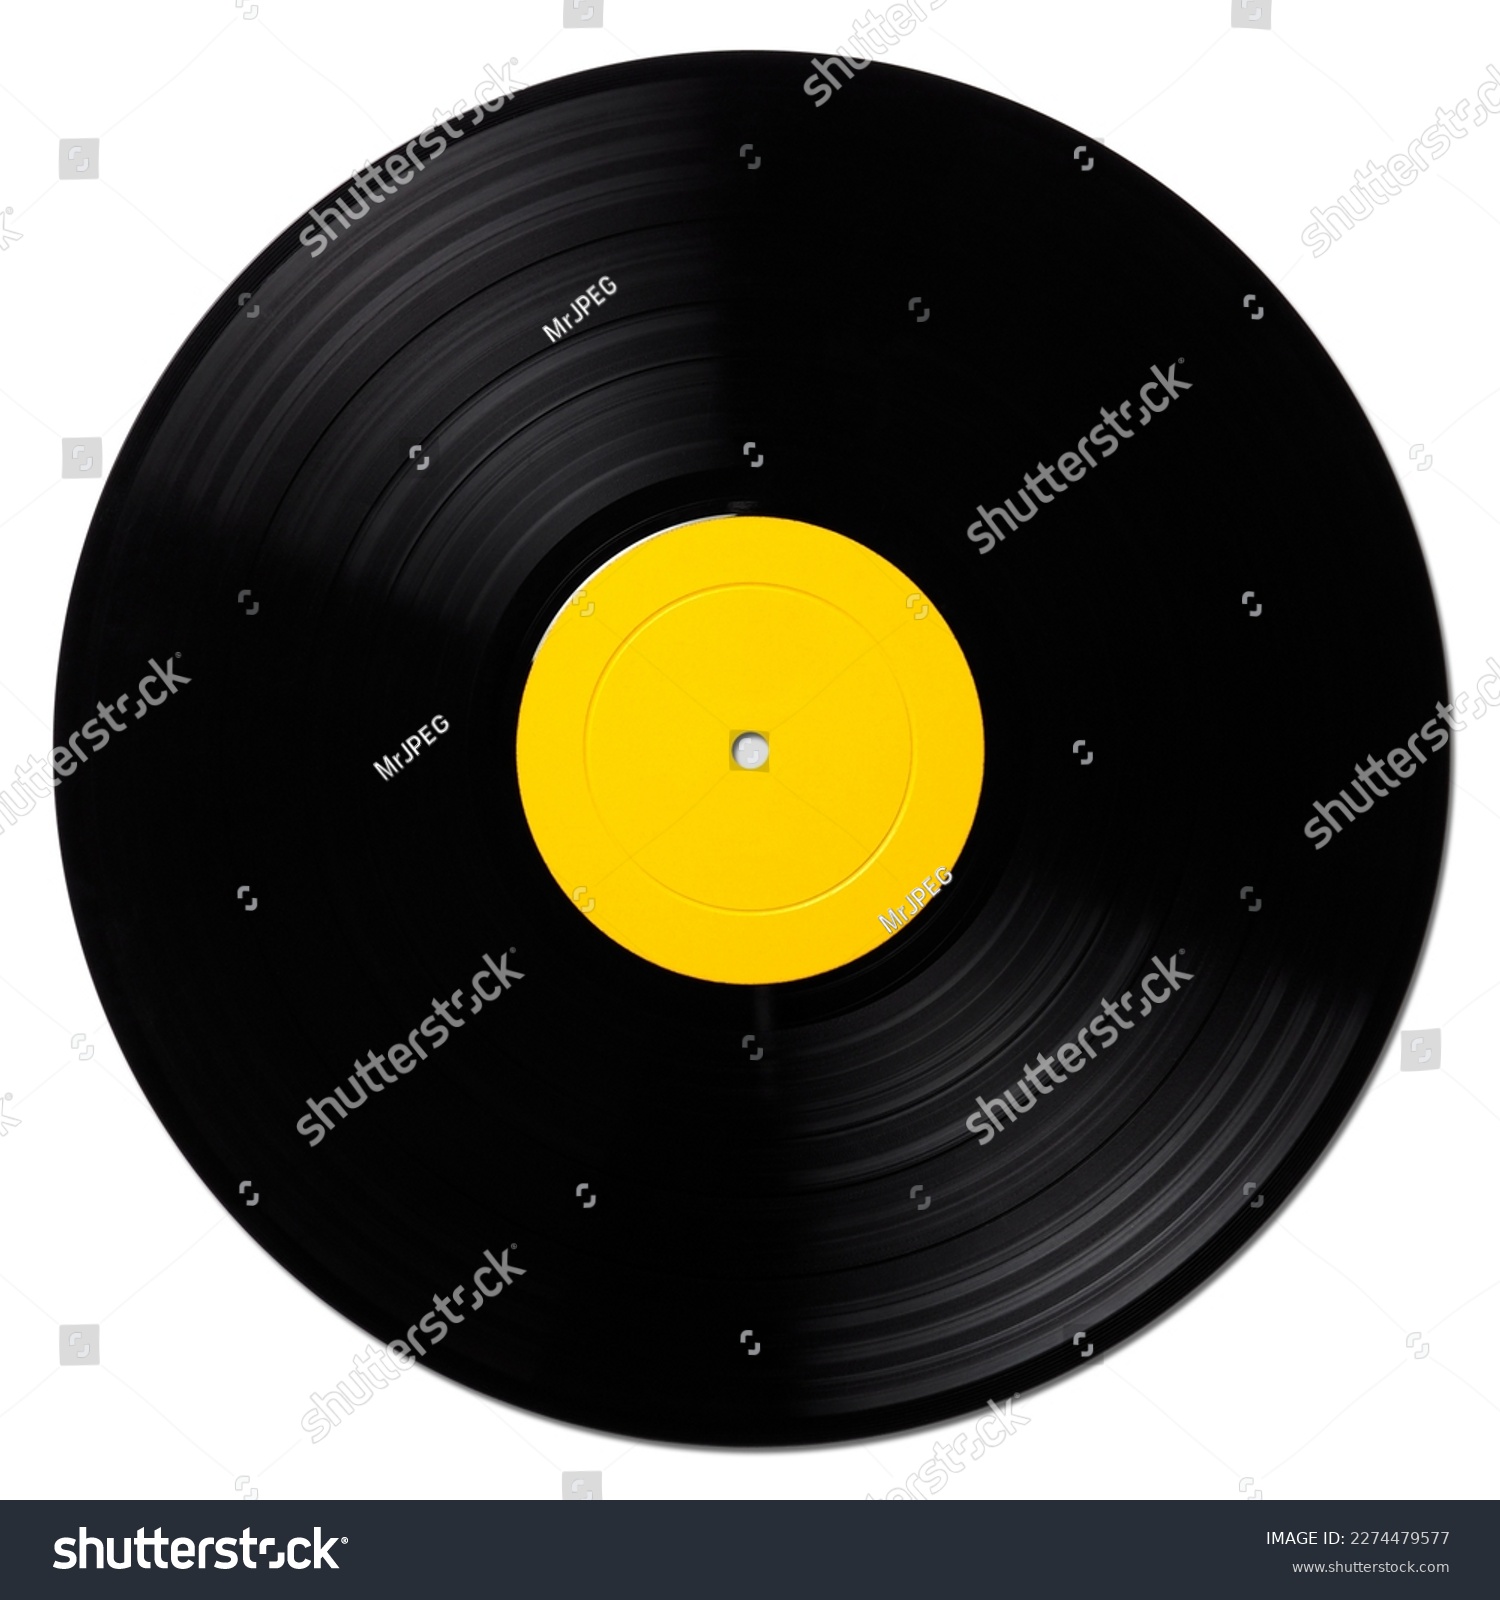 A 12-inch LP vinyl record isolated on white background with clipping paths #2274479577